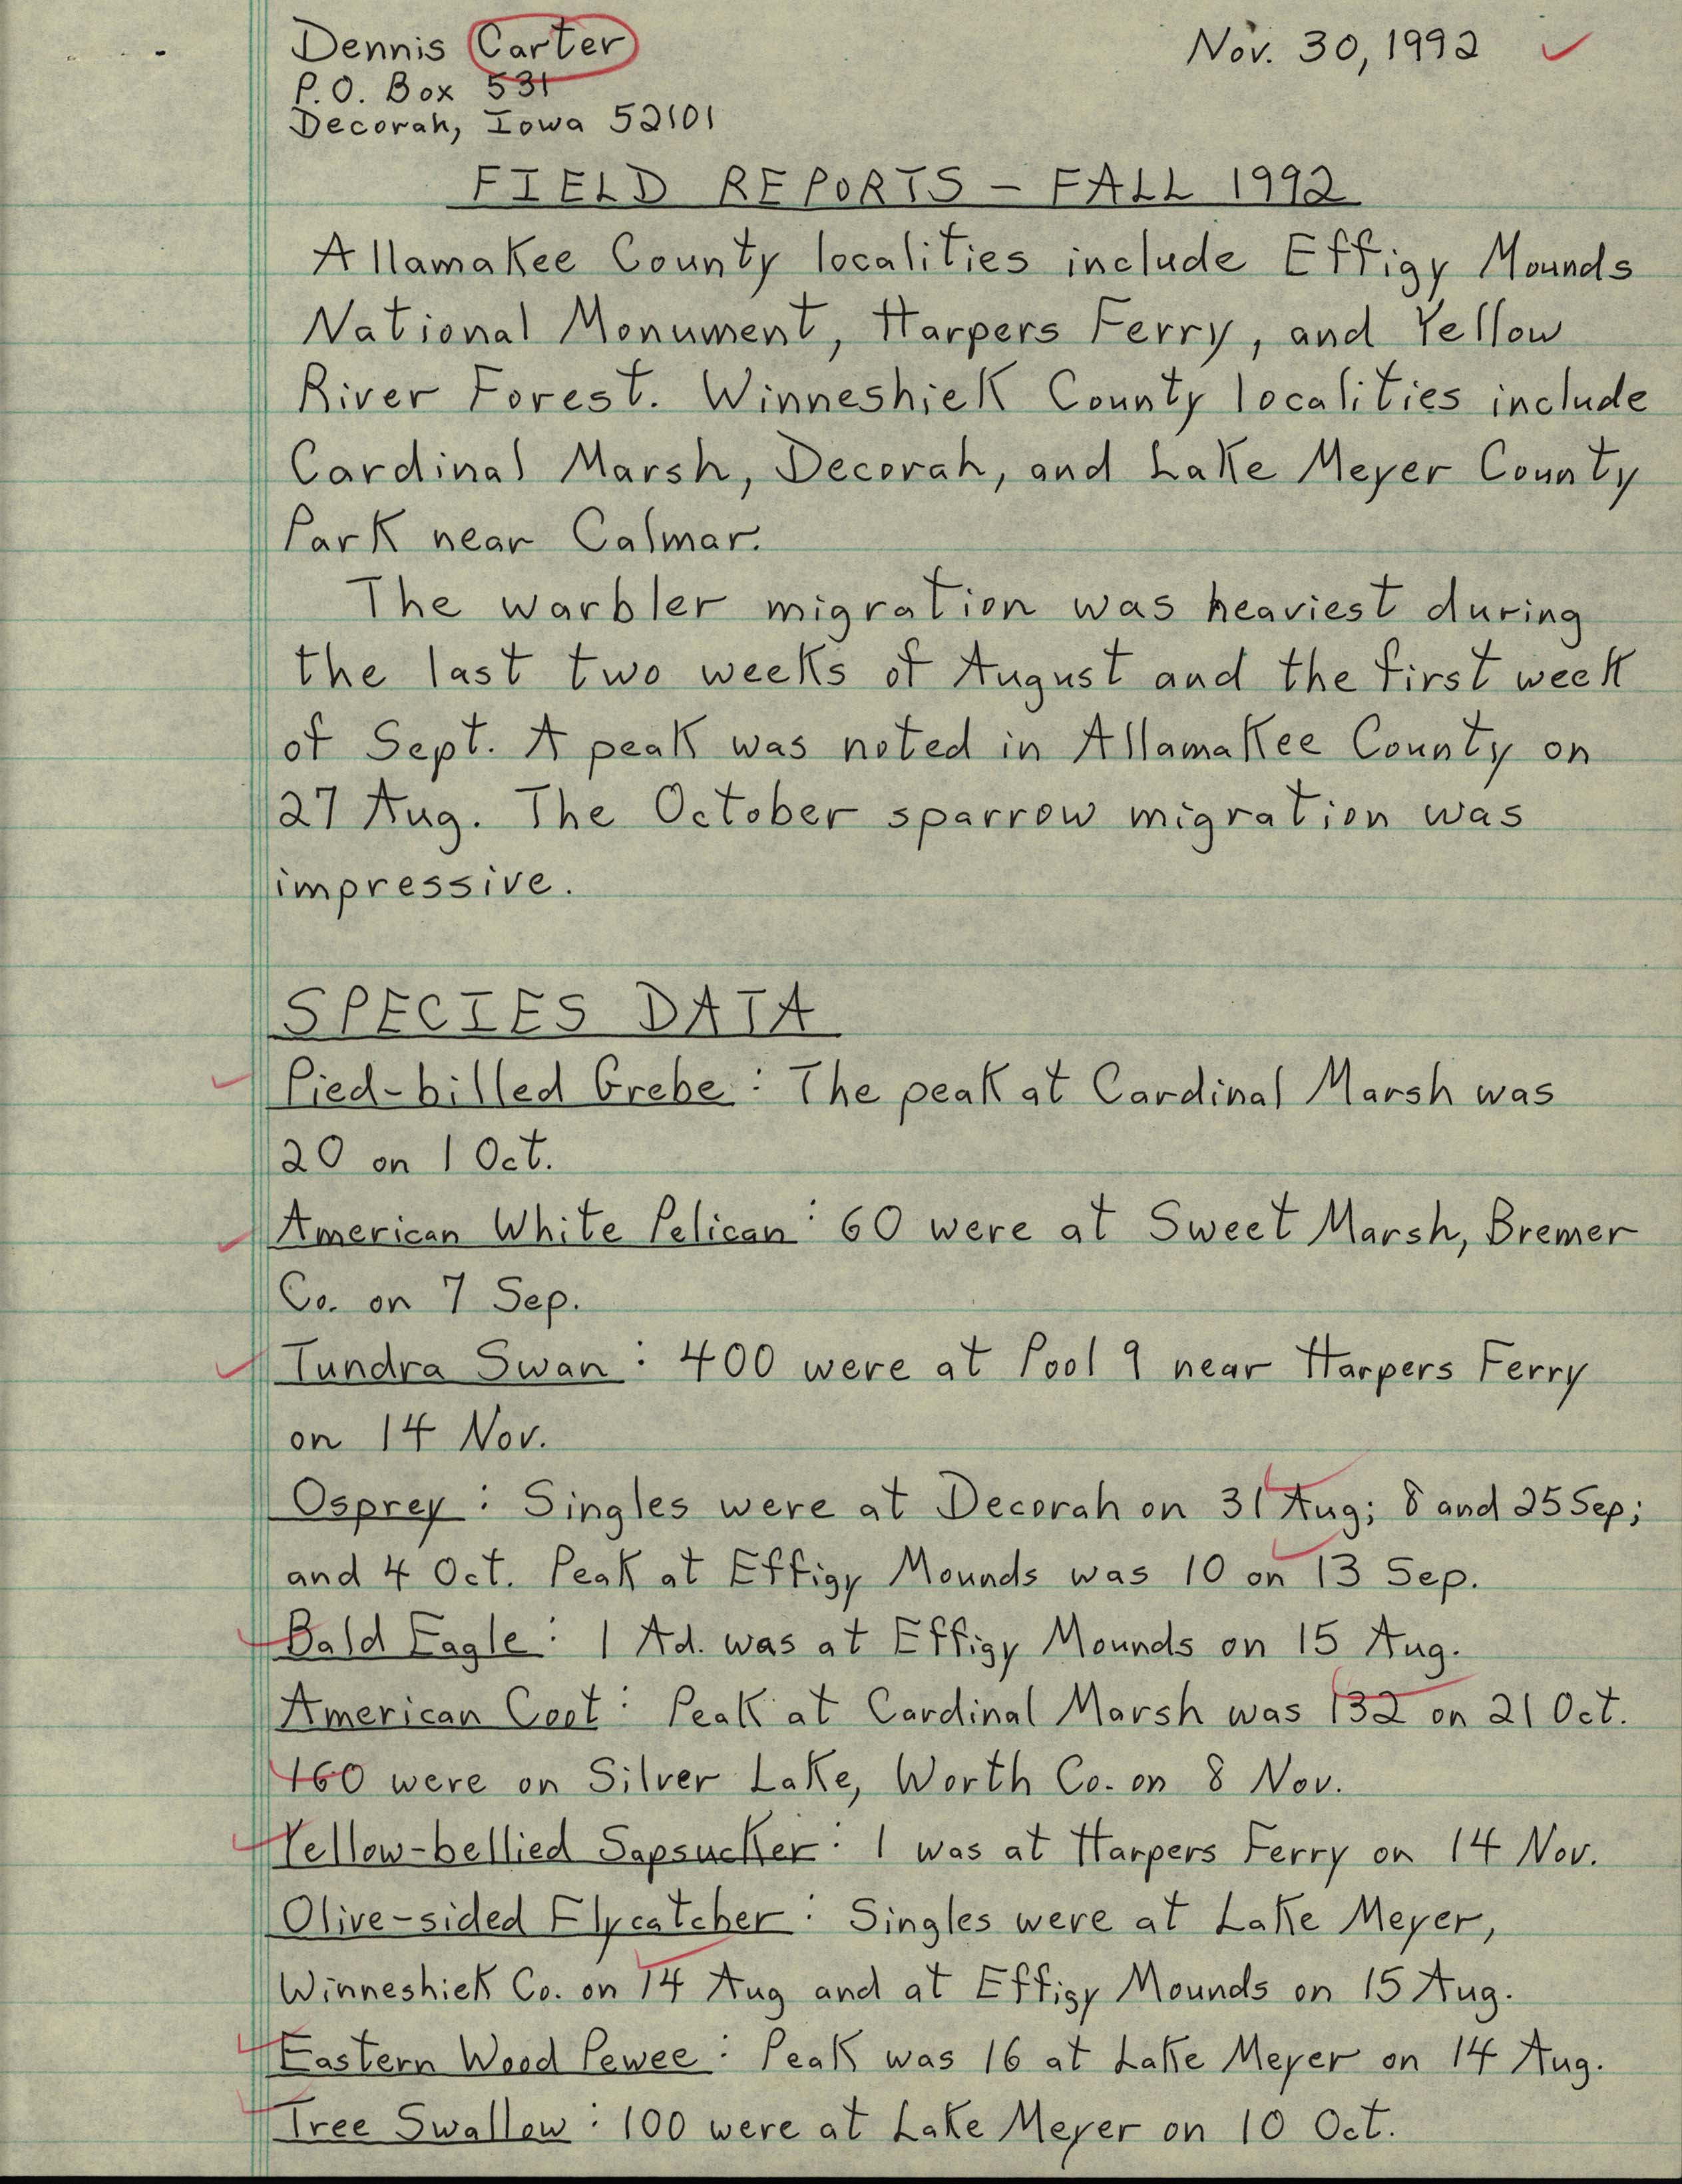 Field notes contributed by Dennis L. Carter, November 30, 1992